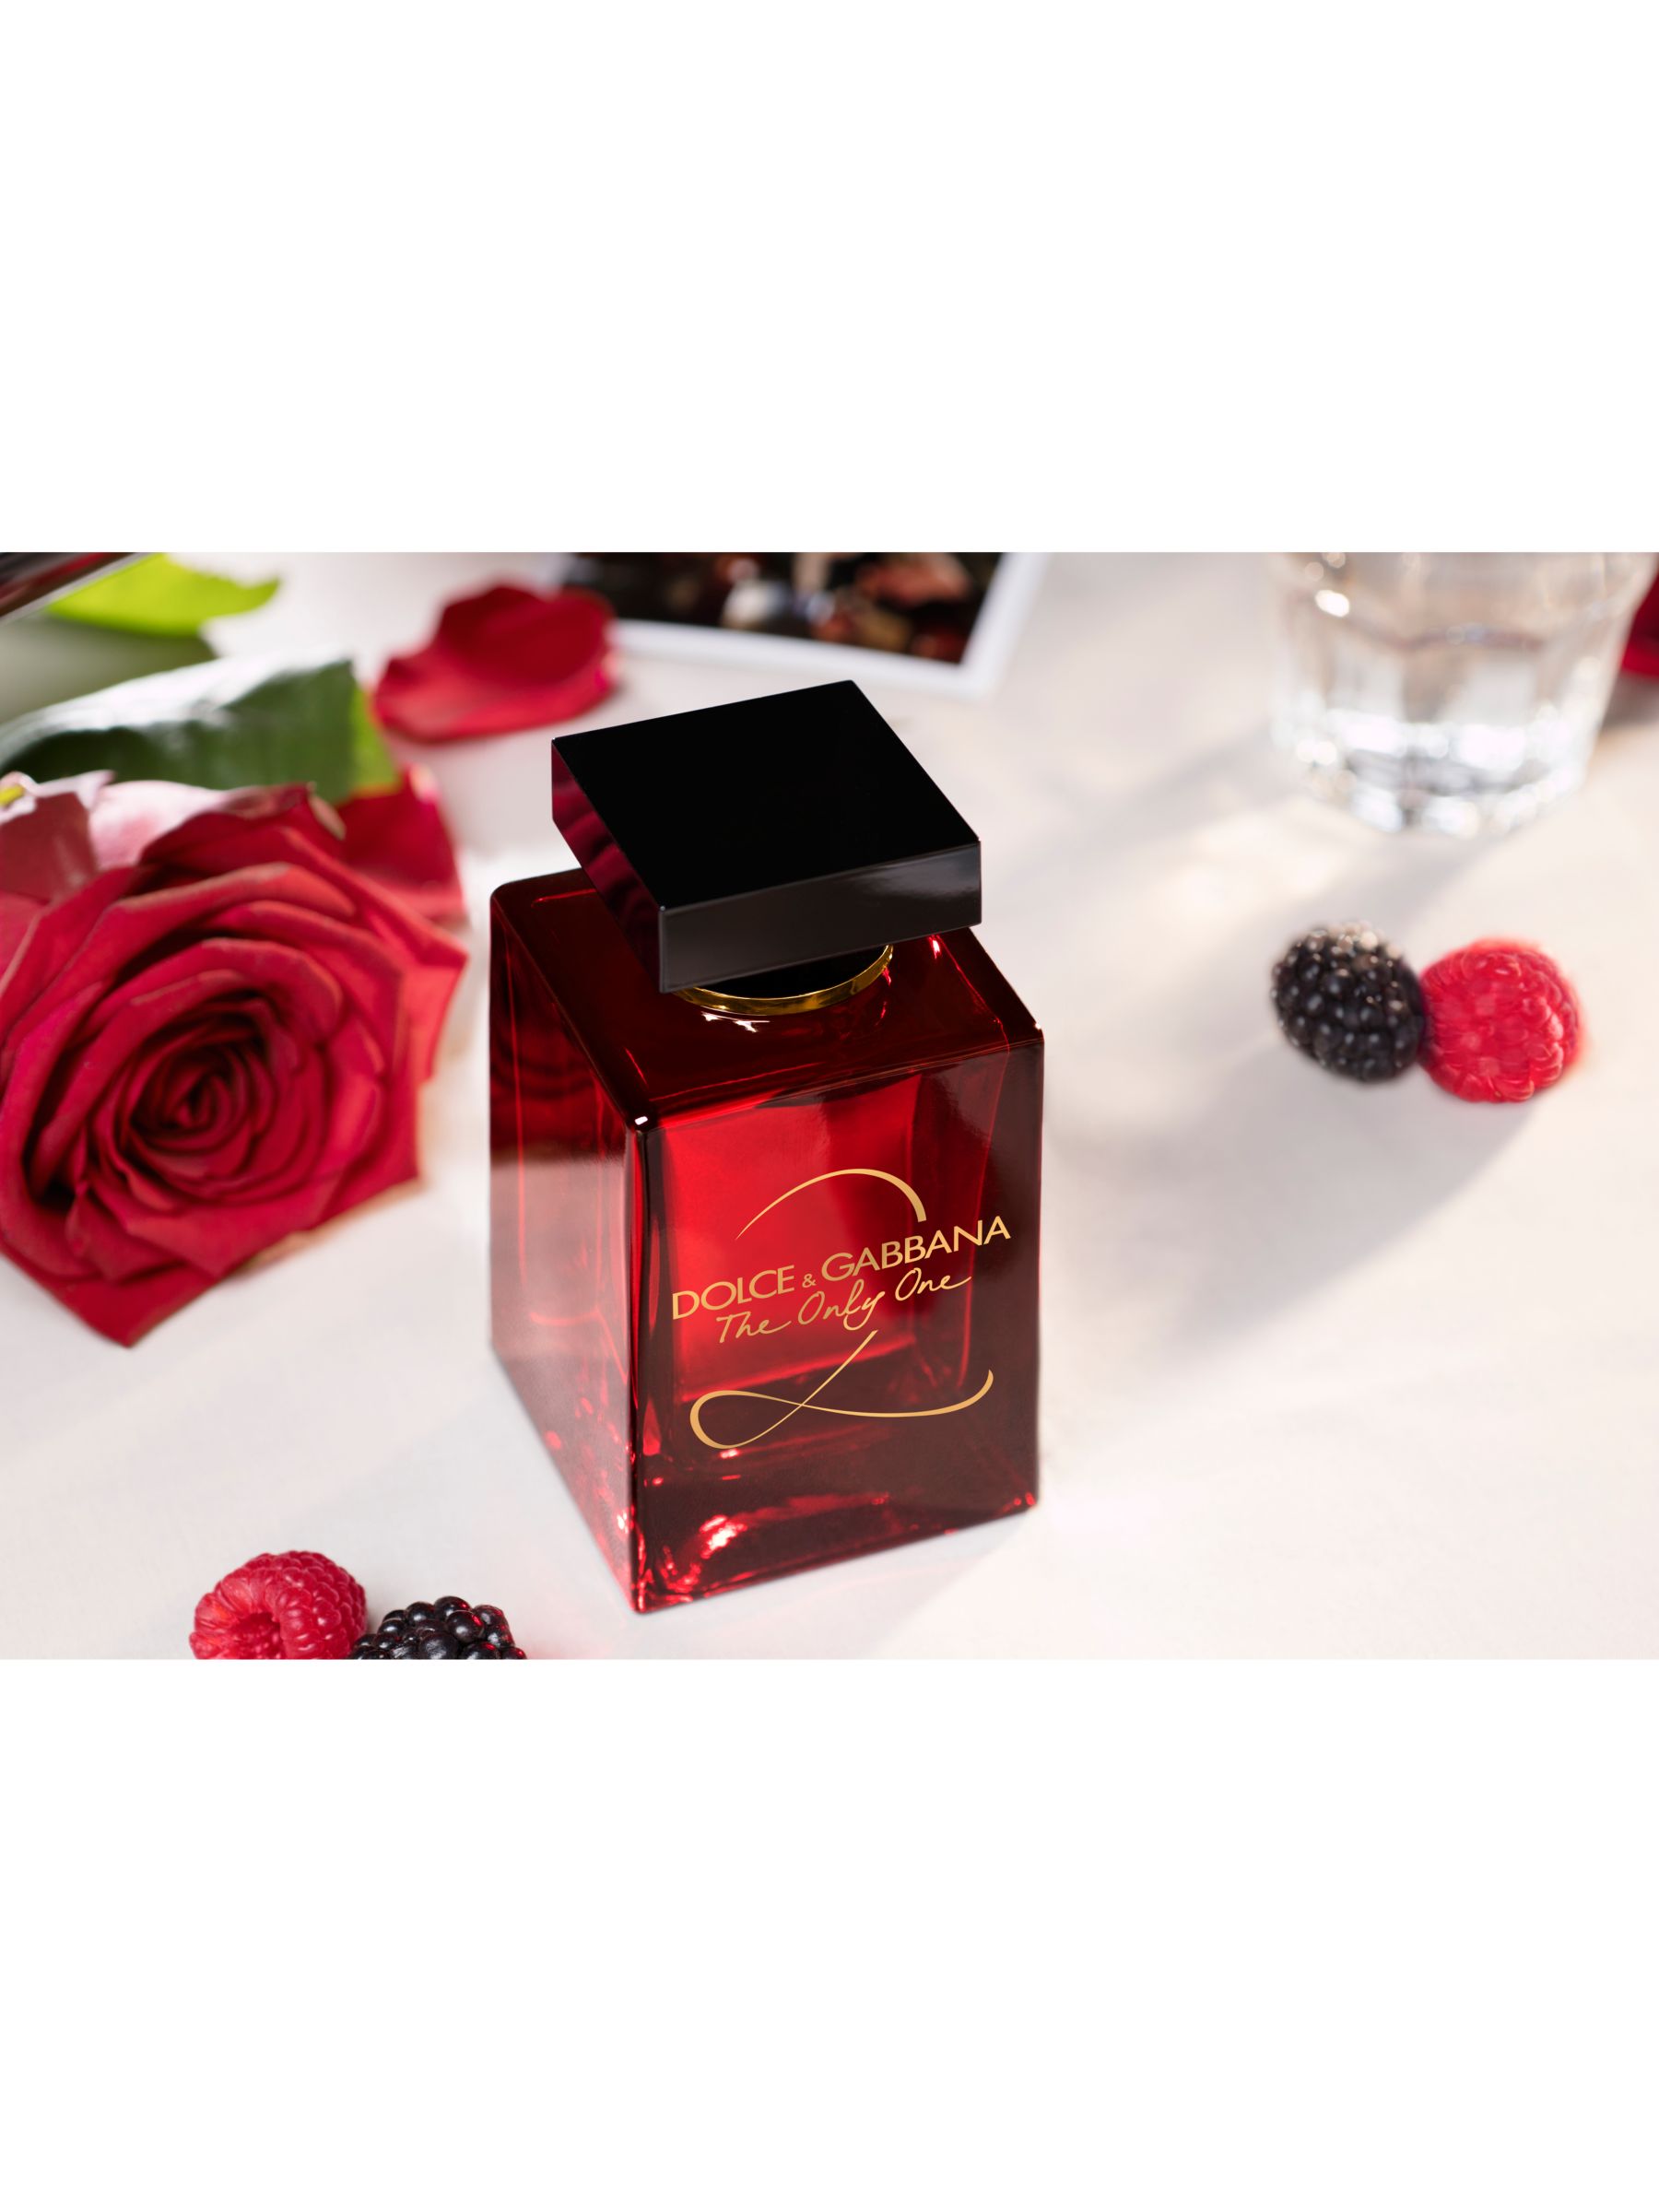 dolce gabbana the only one 2 50ml